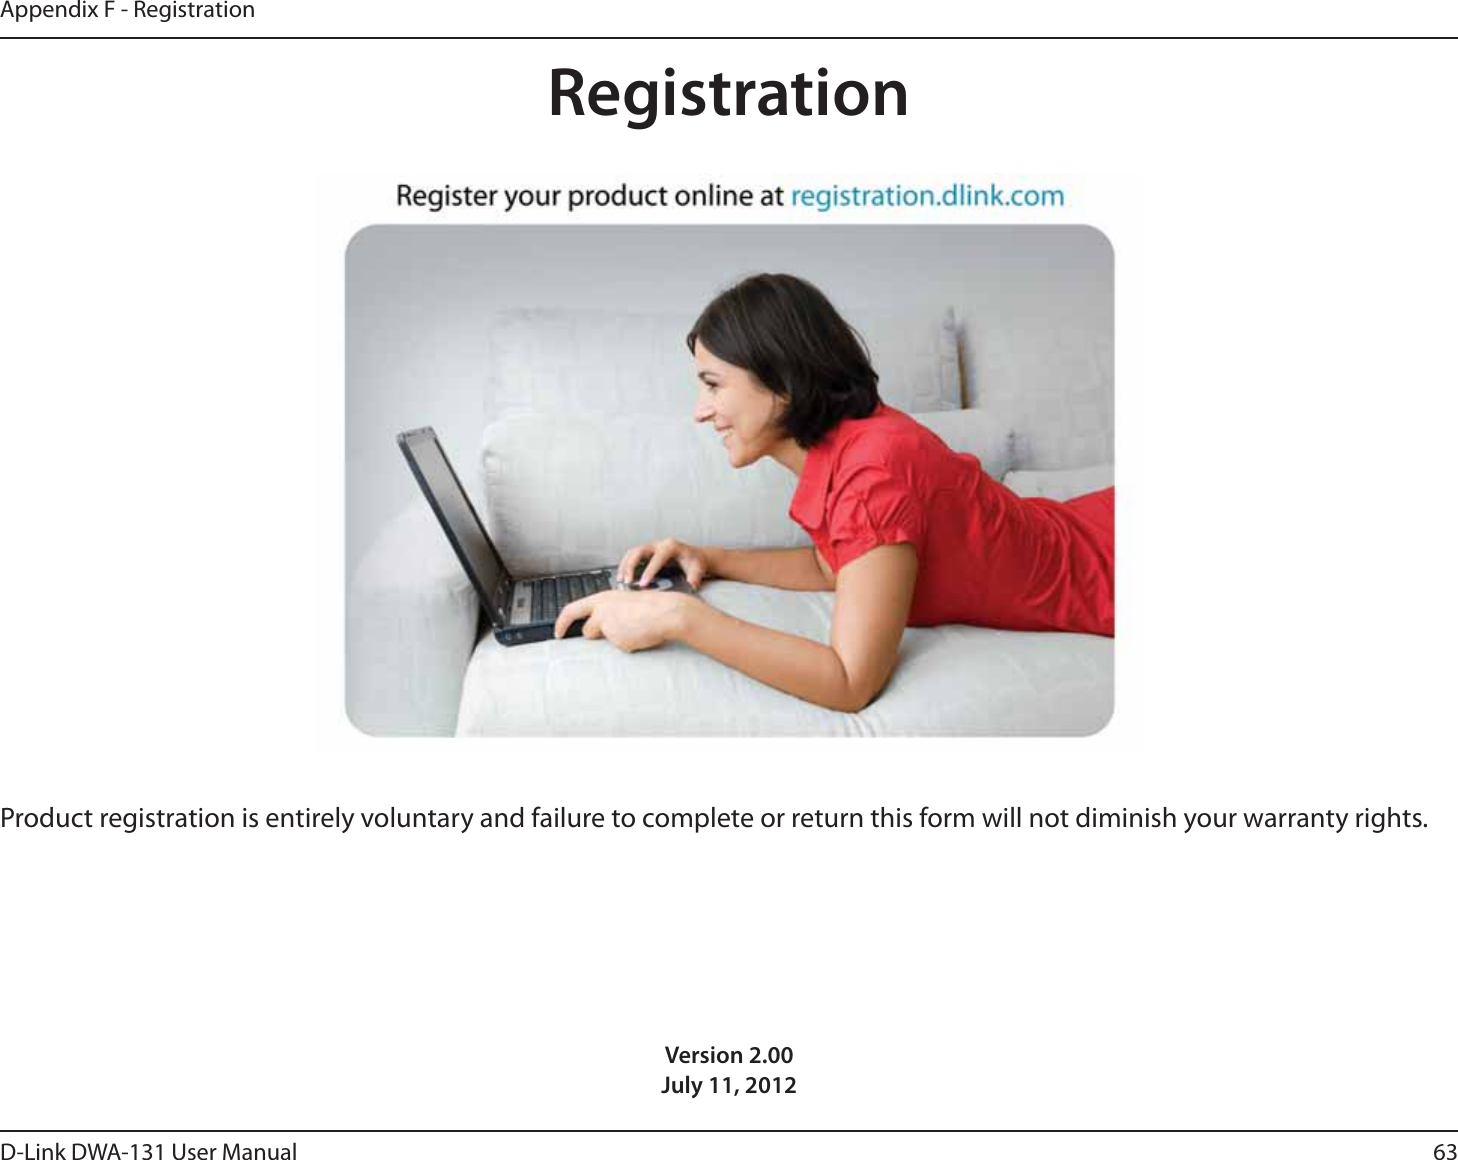 63D-Link DWA-131 User ManualAppendix F - RegistrationVersion 2.00July 11, 2012Product registration is entirely voluntary and failure to complete or return this form will not diminish your warranty rights.Registration